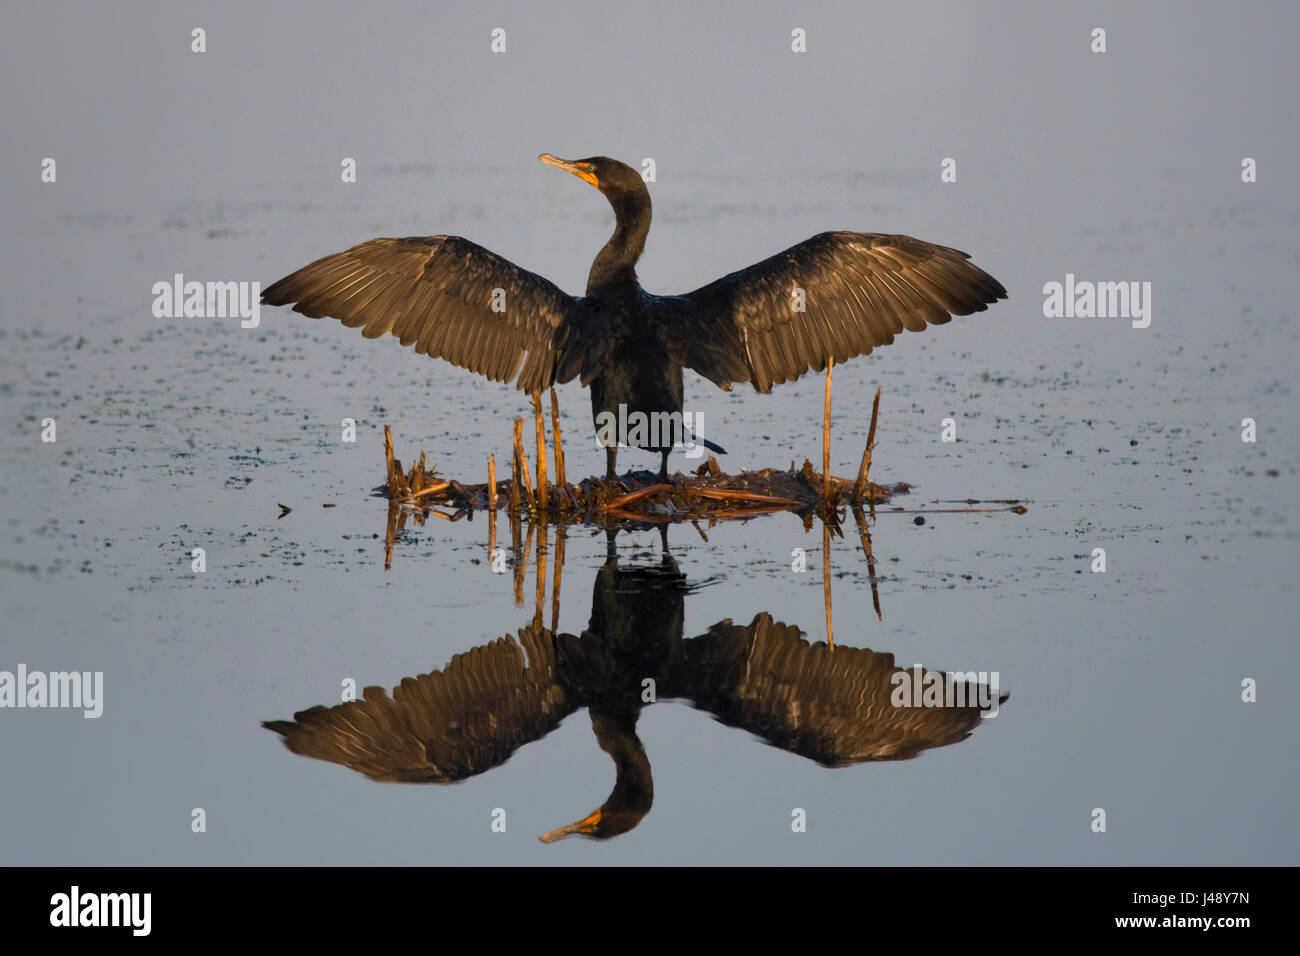 Double-crested Cormorant displays full wingspan with reflection Stock Photo